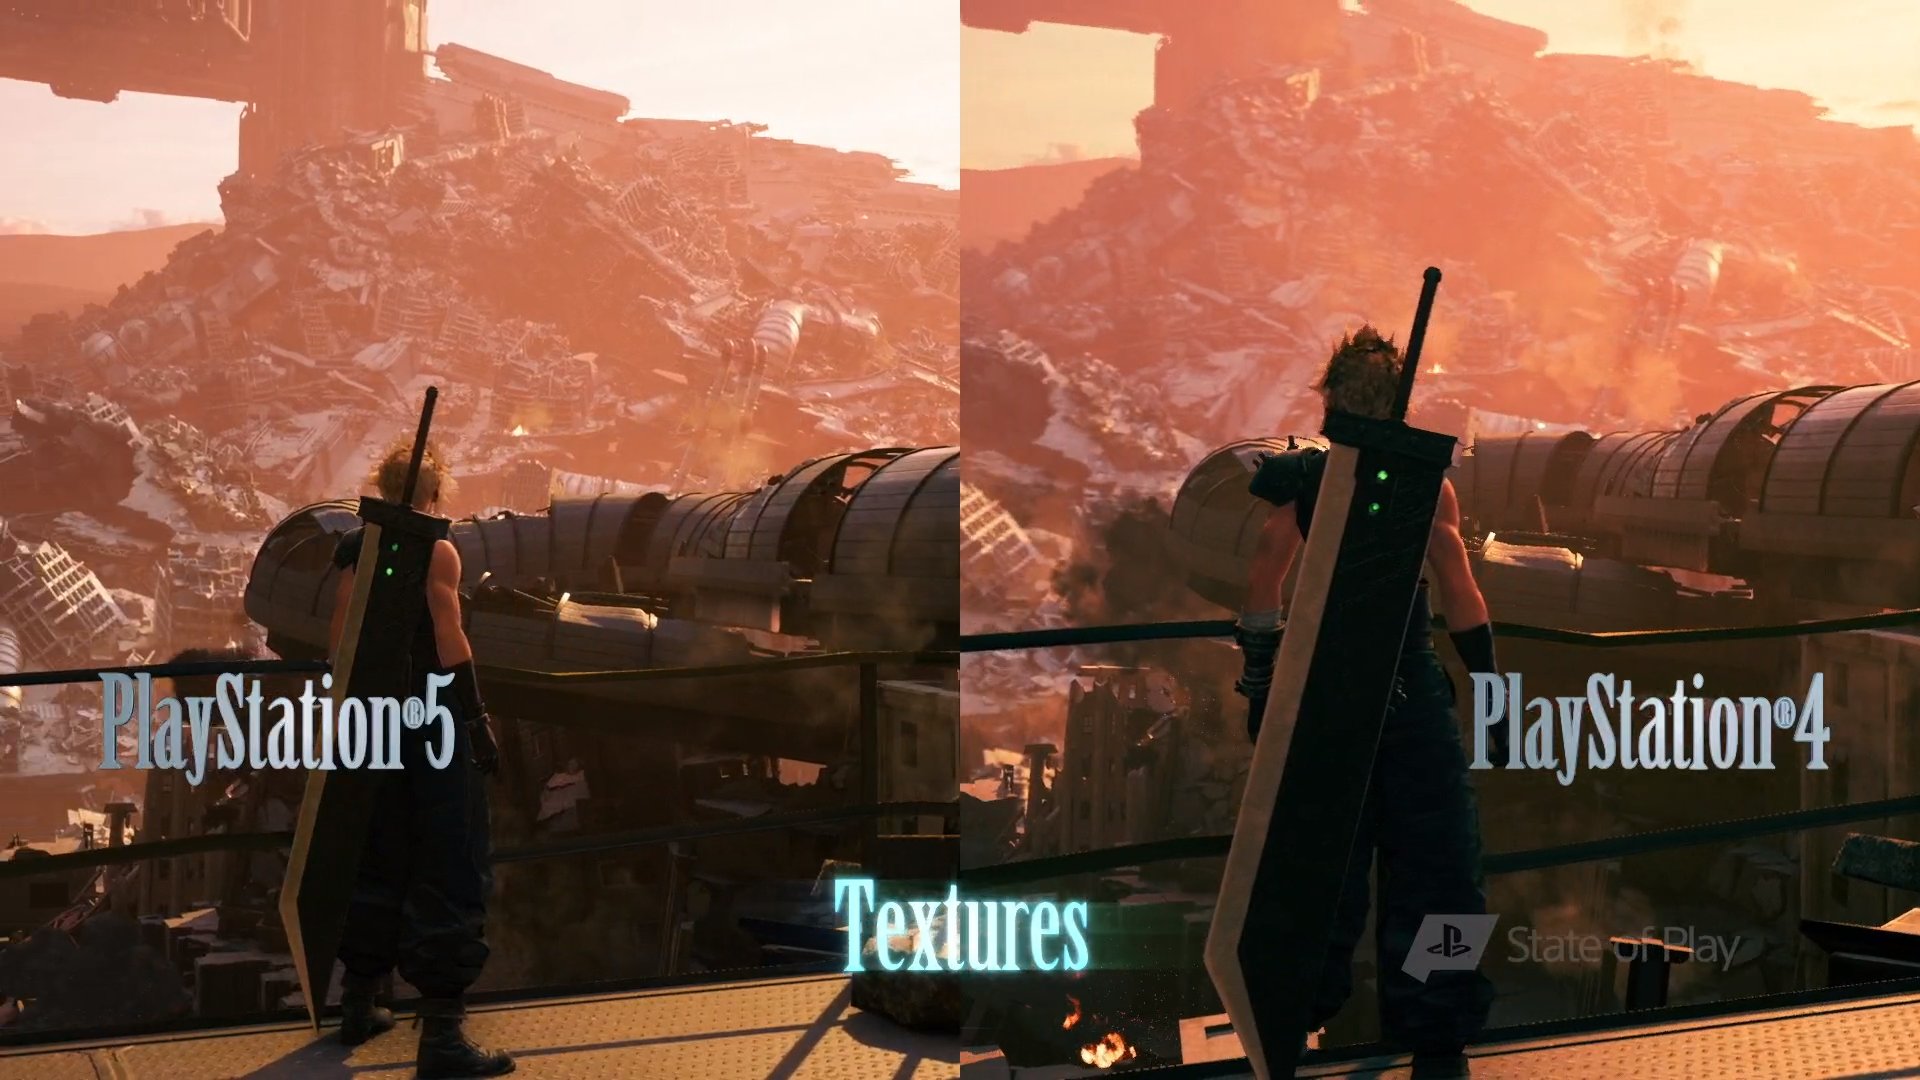 Final Fantasy 7 Remake Intergrade PS5: Two images of Cloud Strife are next to each other, labelled PS5 and PS4. He looks out over a landfill site, the PS5 image is higher quality.